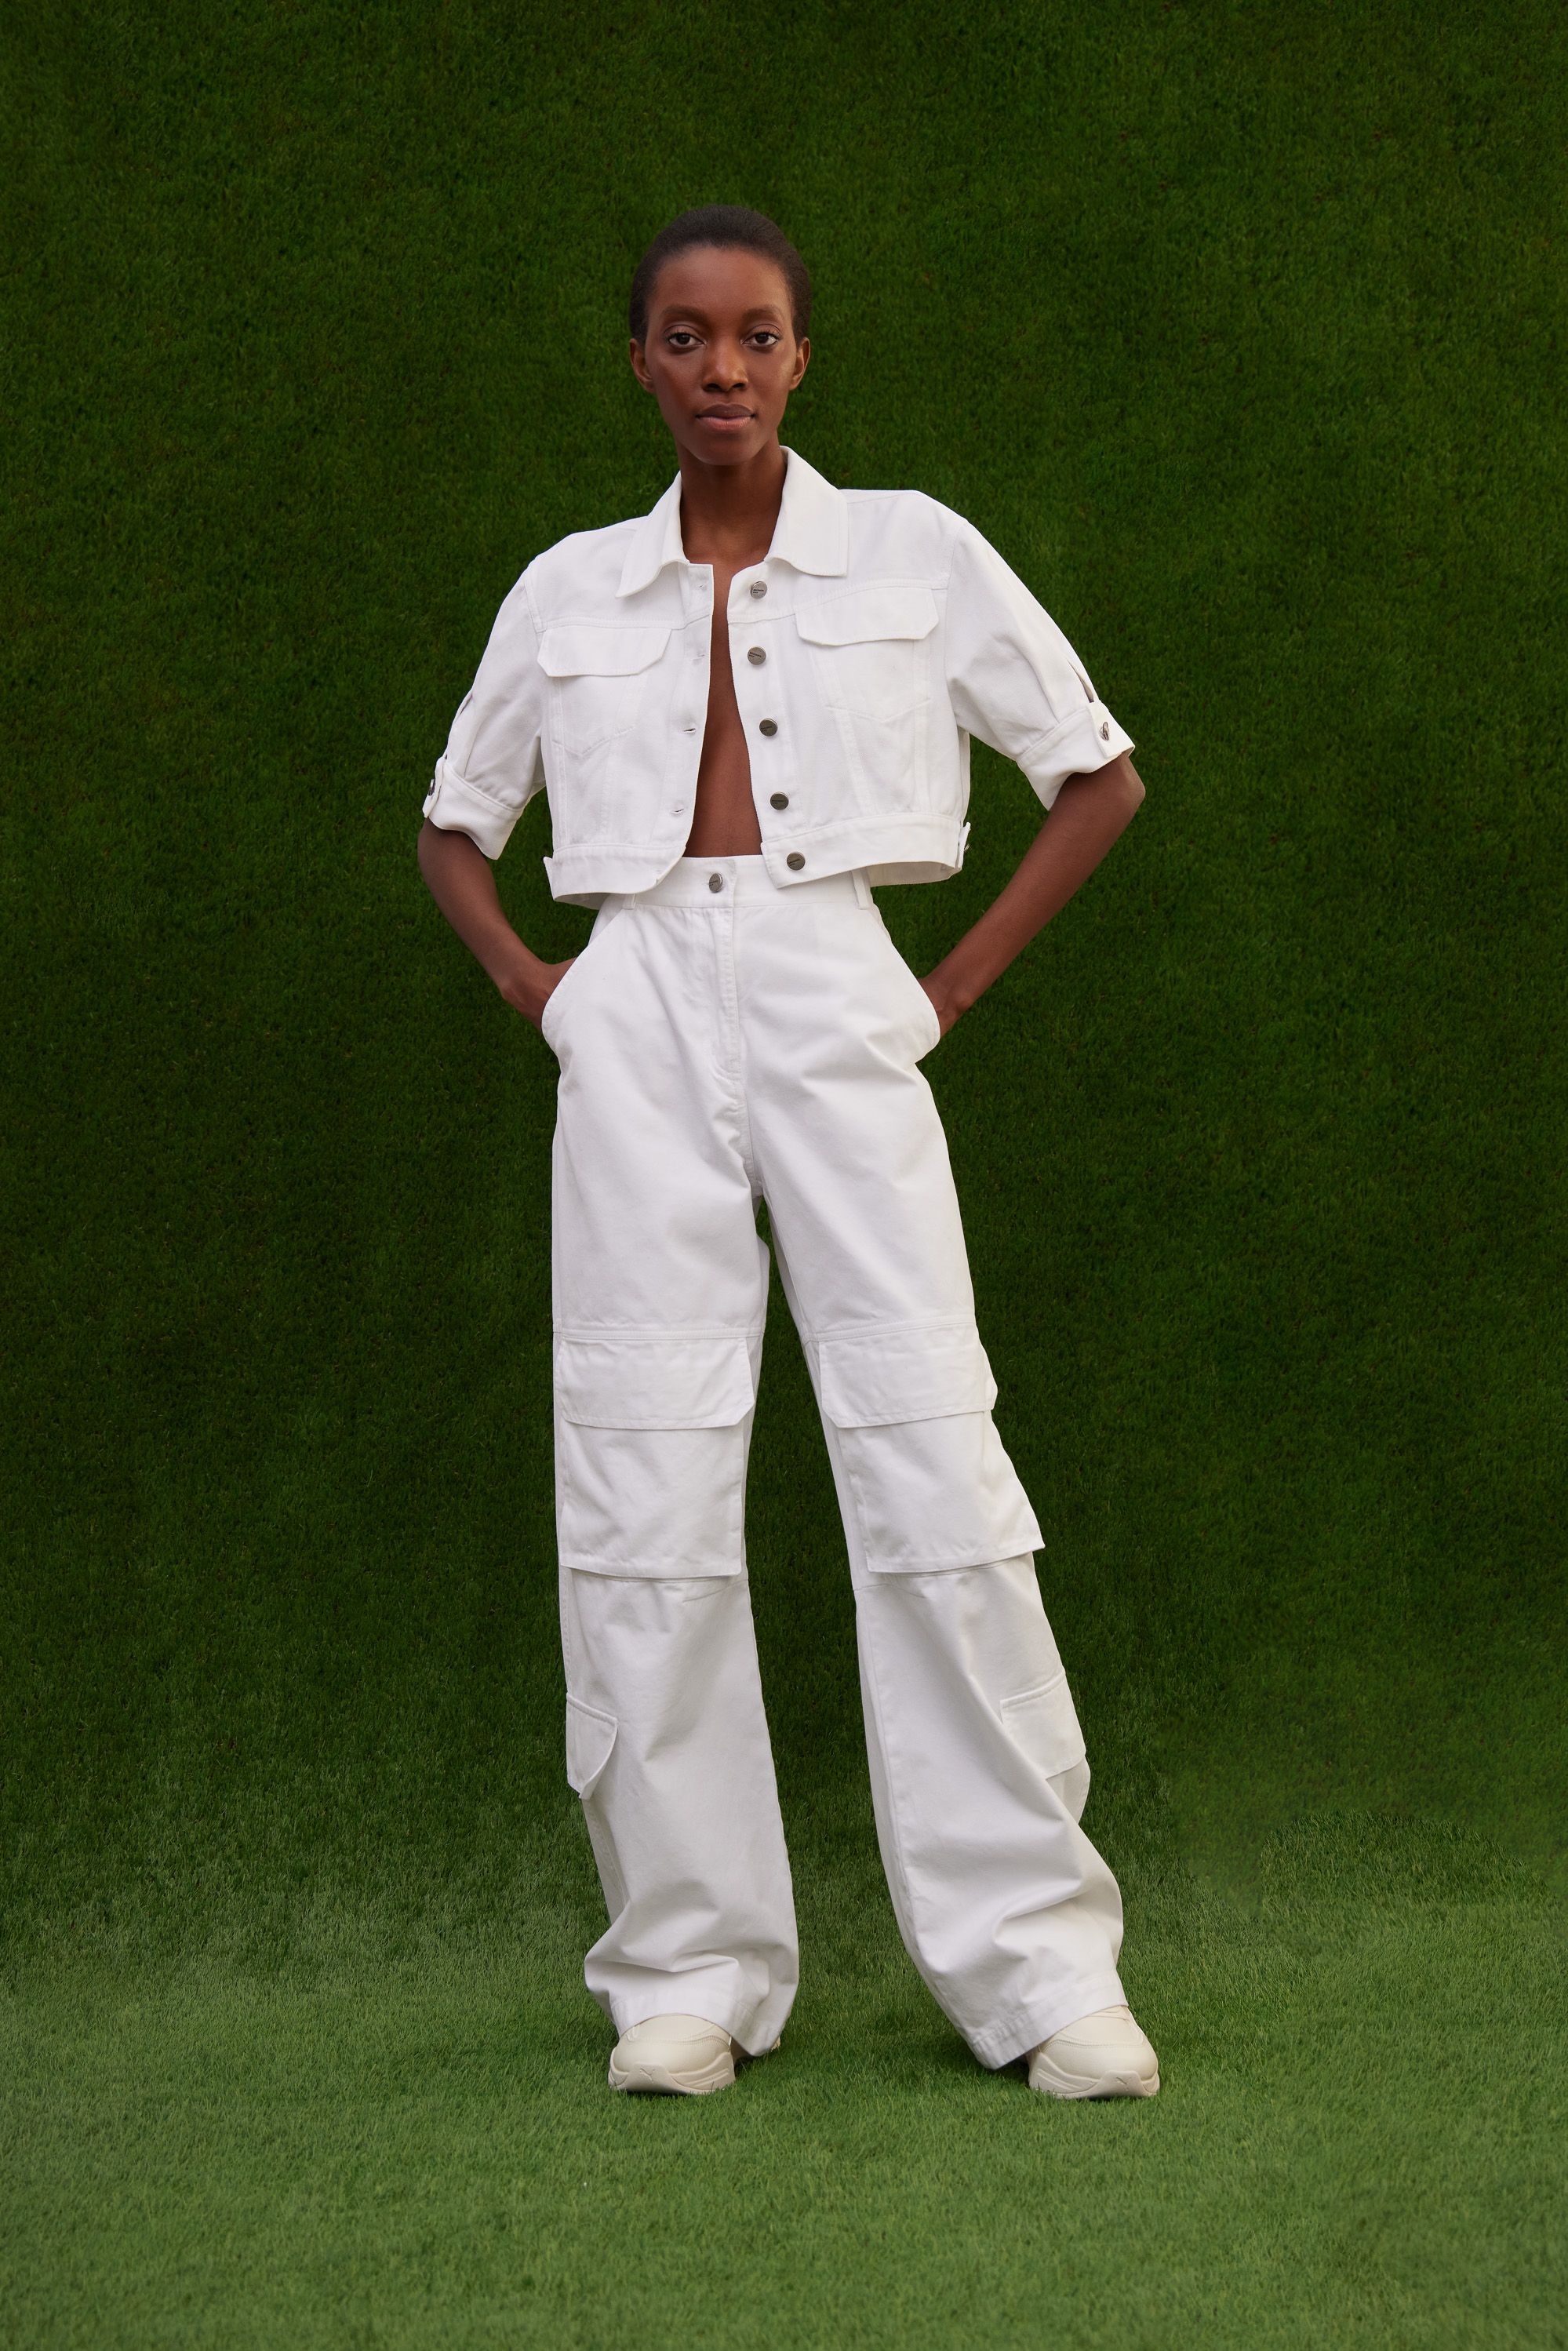 Trousers 3945-02 White from BRUSNiKA